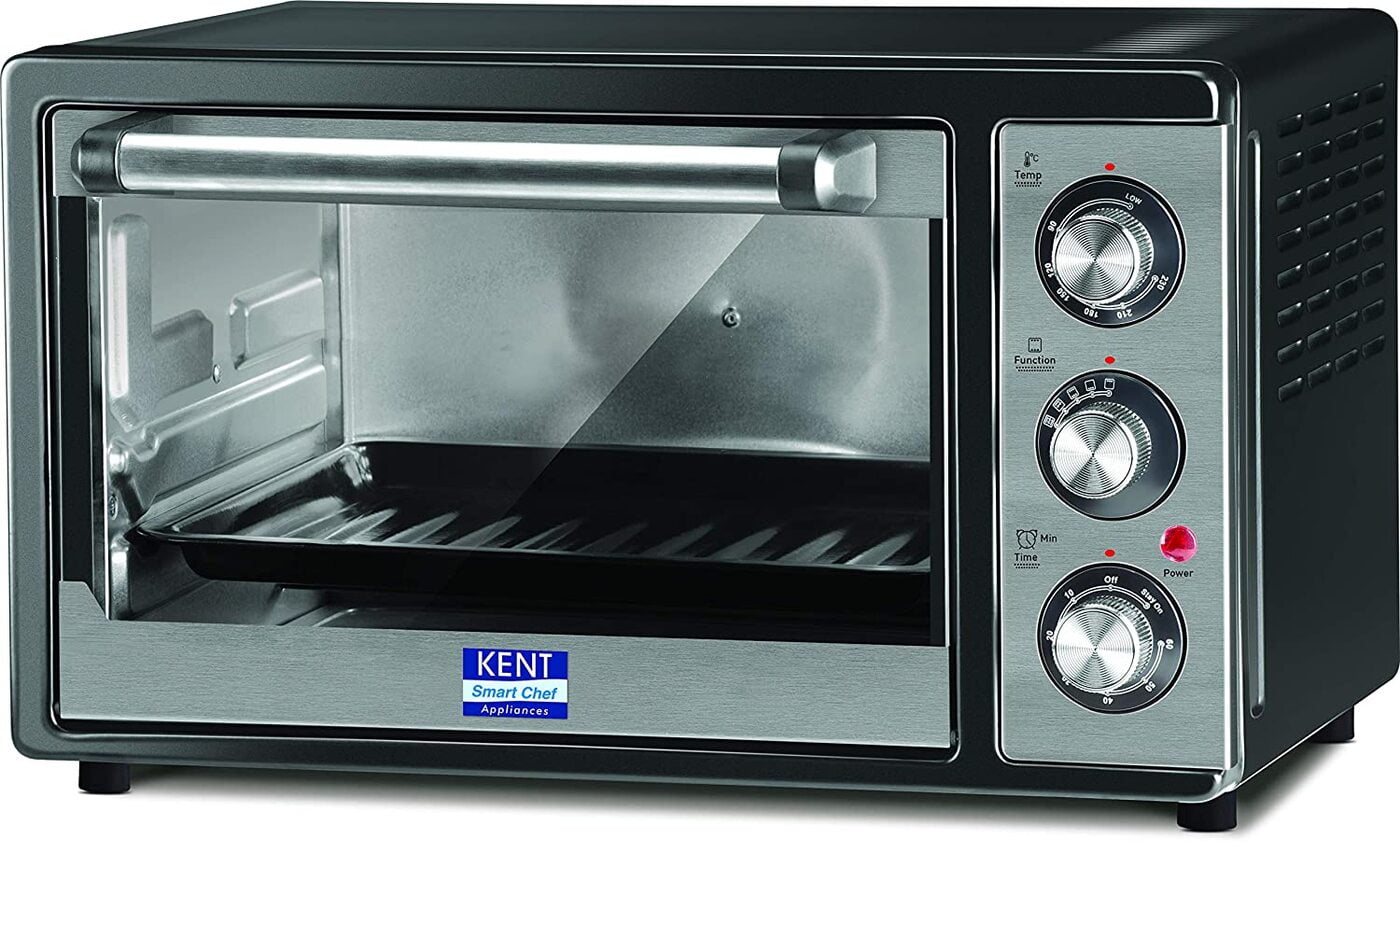 Buy Kent OTG ( Oven Toaster Griller ) 20LTR Online at lowest price in India on Dillimall.Com